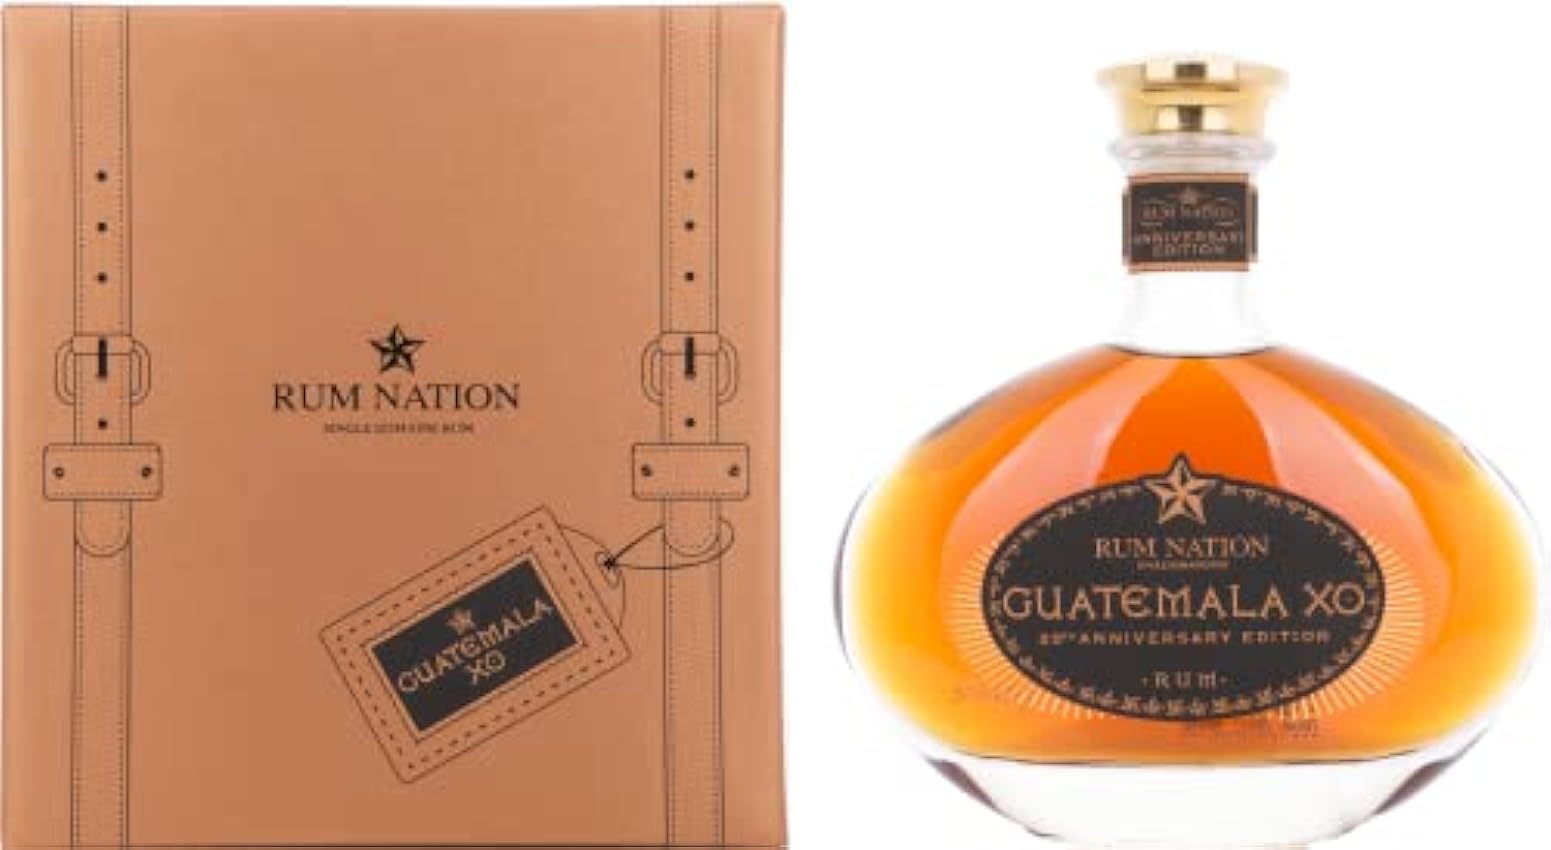 Rum Nation Guatemala XO 20th Anniversary Edition 40% Vol. 0,7l in Giftbox FCwfpdle